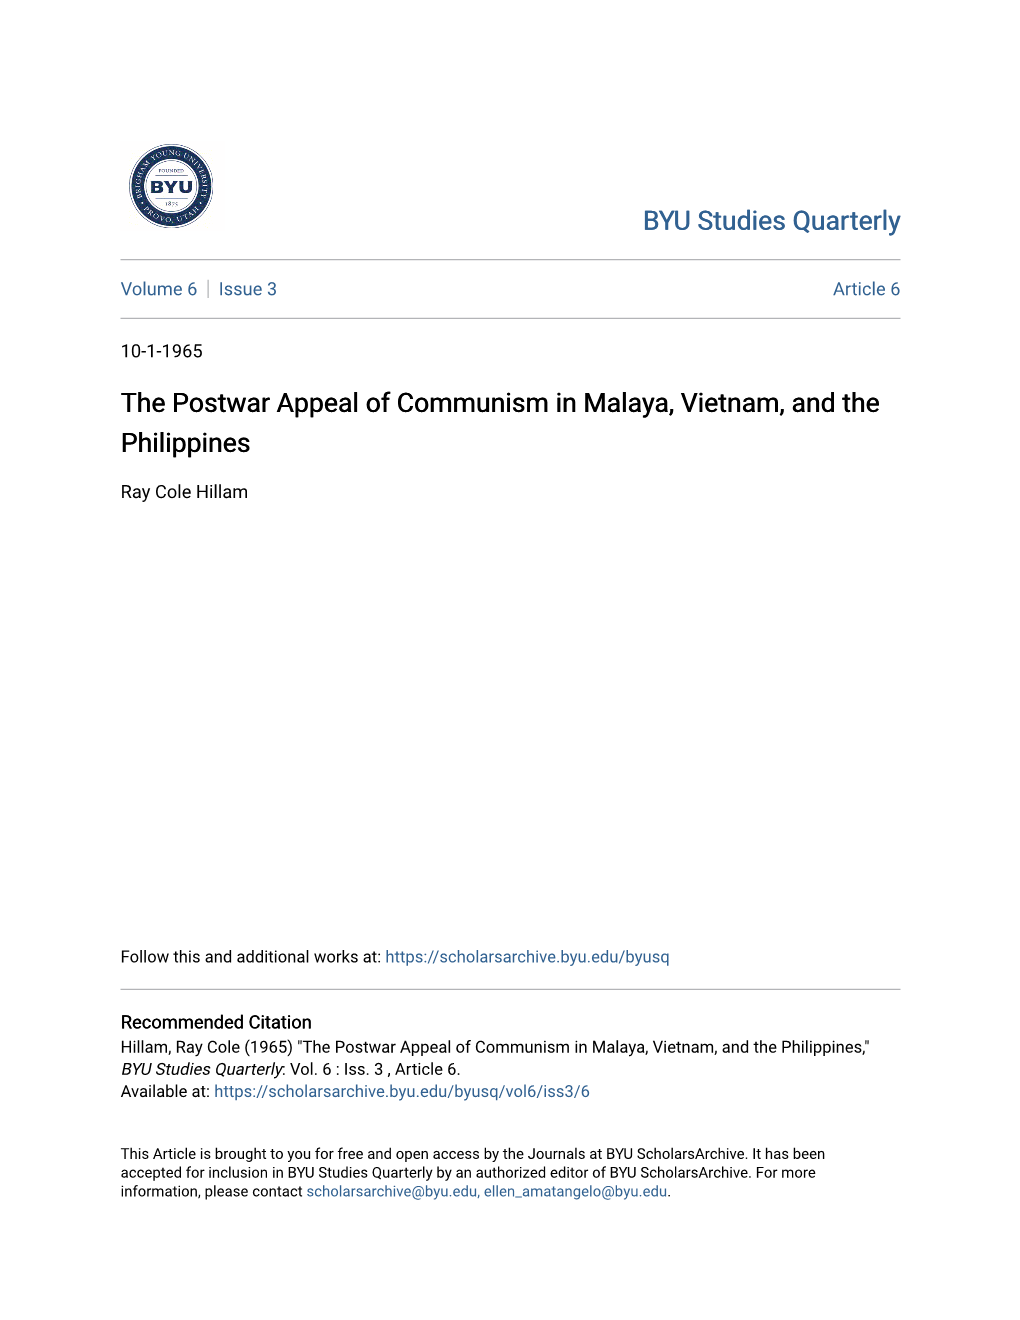 The Postwar Appeal of Communism in Malaya, Vietnam, and the Philippines